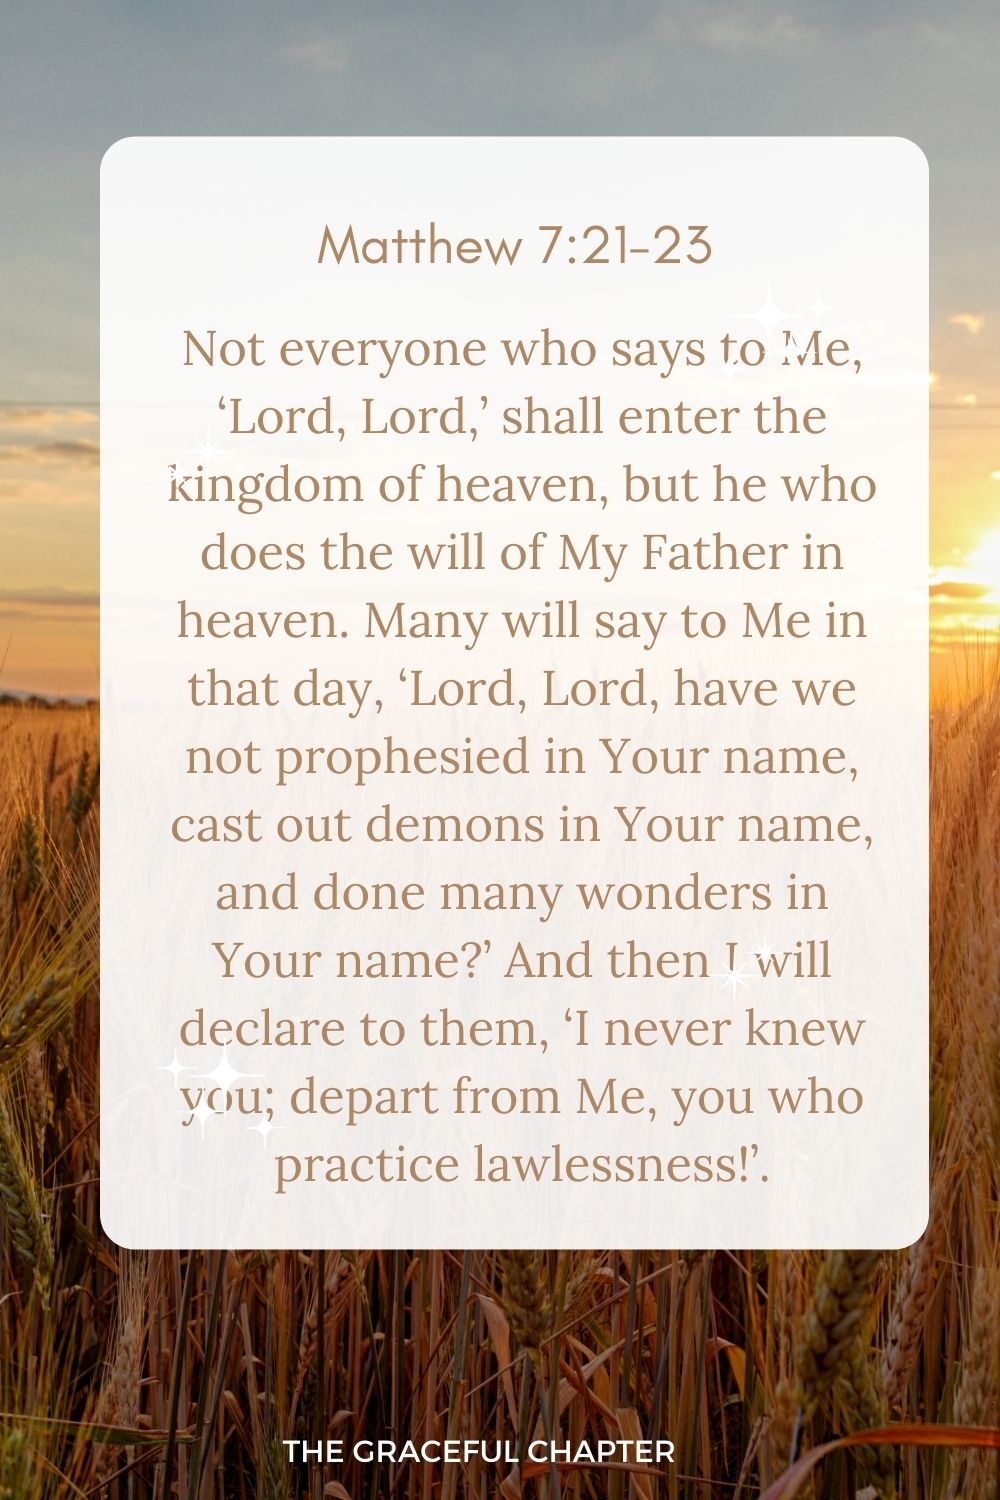 Not everyone who says to Me, ‘Lord, Lord,’ shall enter the kingdom of heaven, but he who does the will of My Father in heaven. Many will say to Me in that day, ‘Lord, Lord, have we not prophesied in Your name, cast out demons in Your name, and done many wonders in Your name?’ And then I will declare to them, ‘I never knew you; depart from Me, you who practice lawlessness!’. Matthew 7:21-23